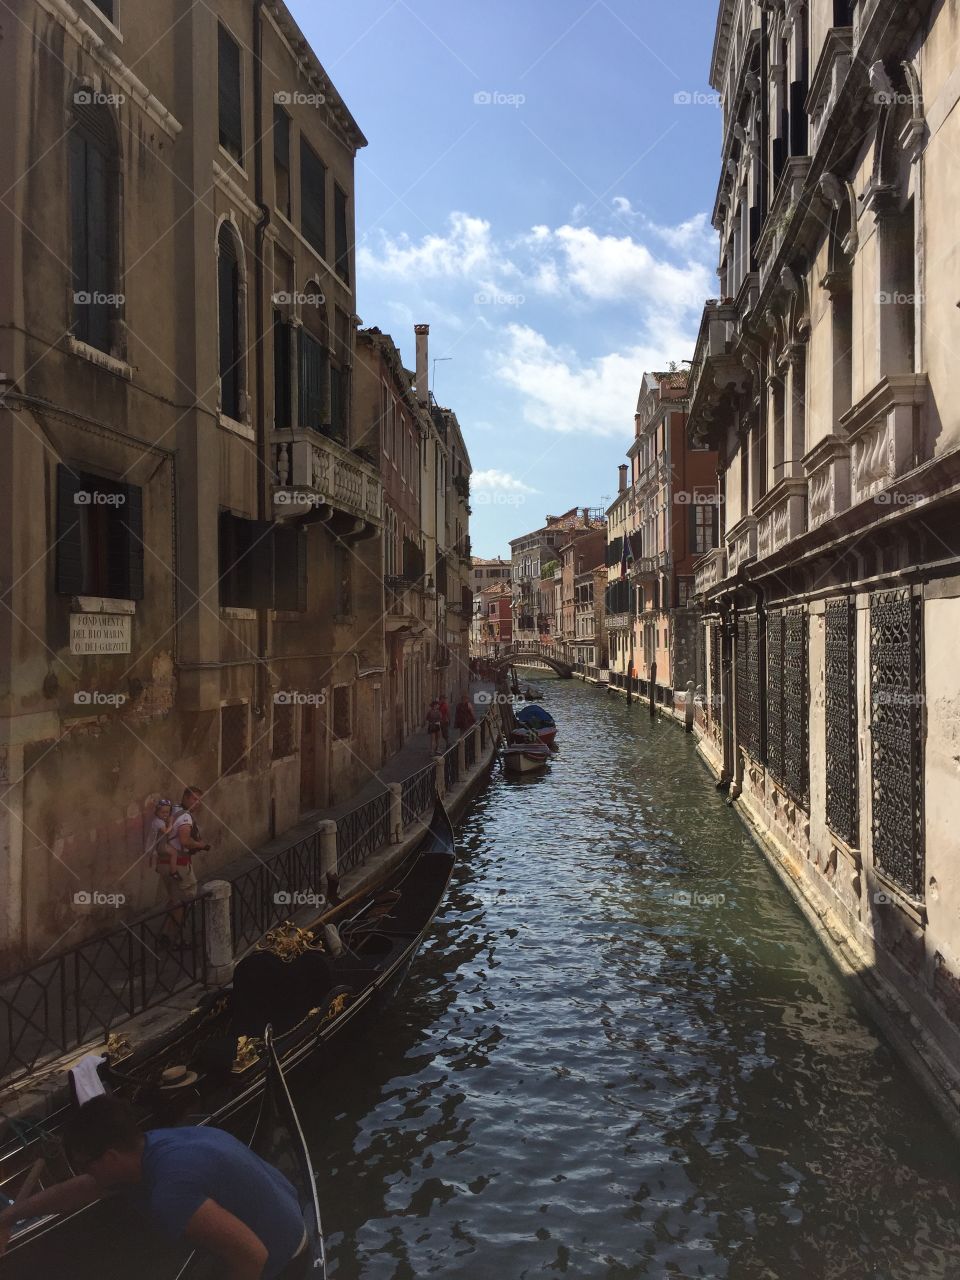 No Person, Travel, Canal, Architecture, Street